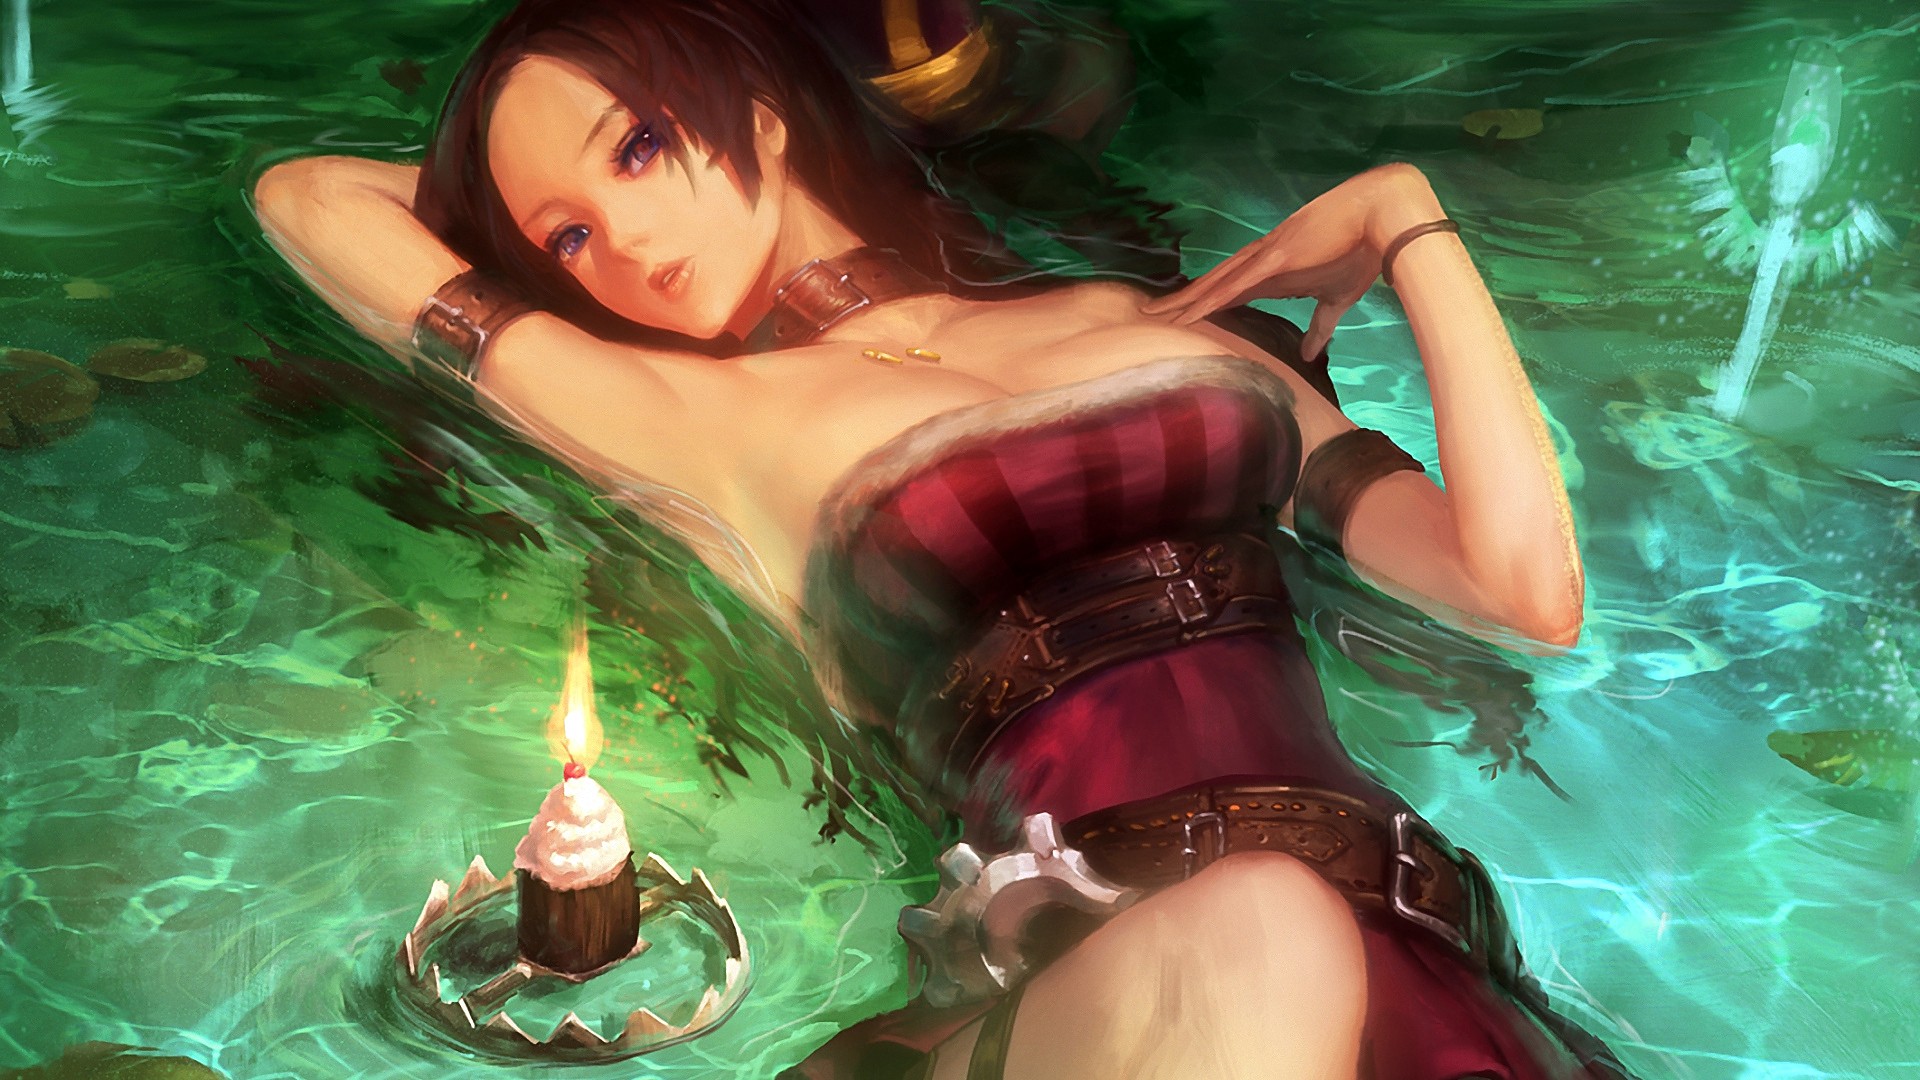 General 1920x1080 League of Legends video games long hair water candles original characters women Caitlyn (League of Legends) boobs in water looking at viewer PC gaming video game art video game girls choker dress red dress fantasy art fantasy girl